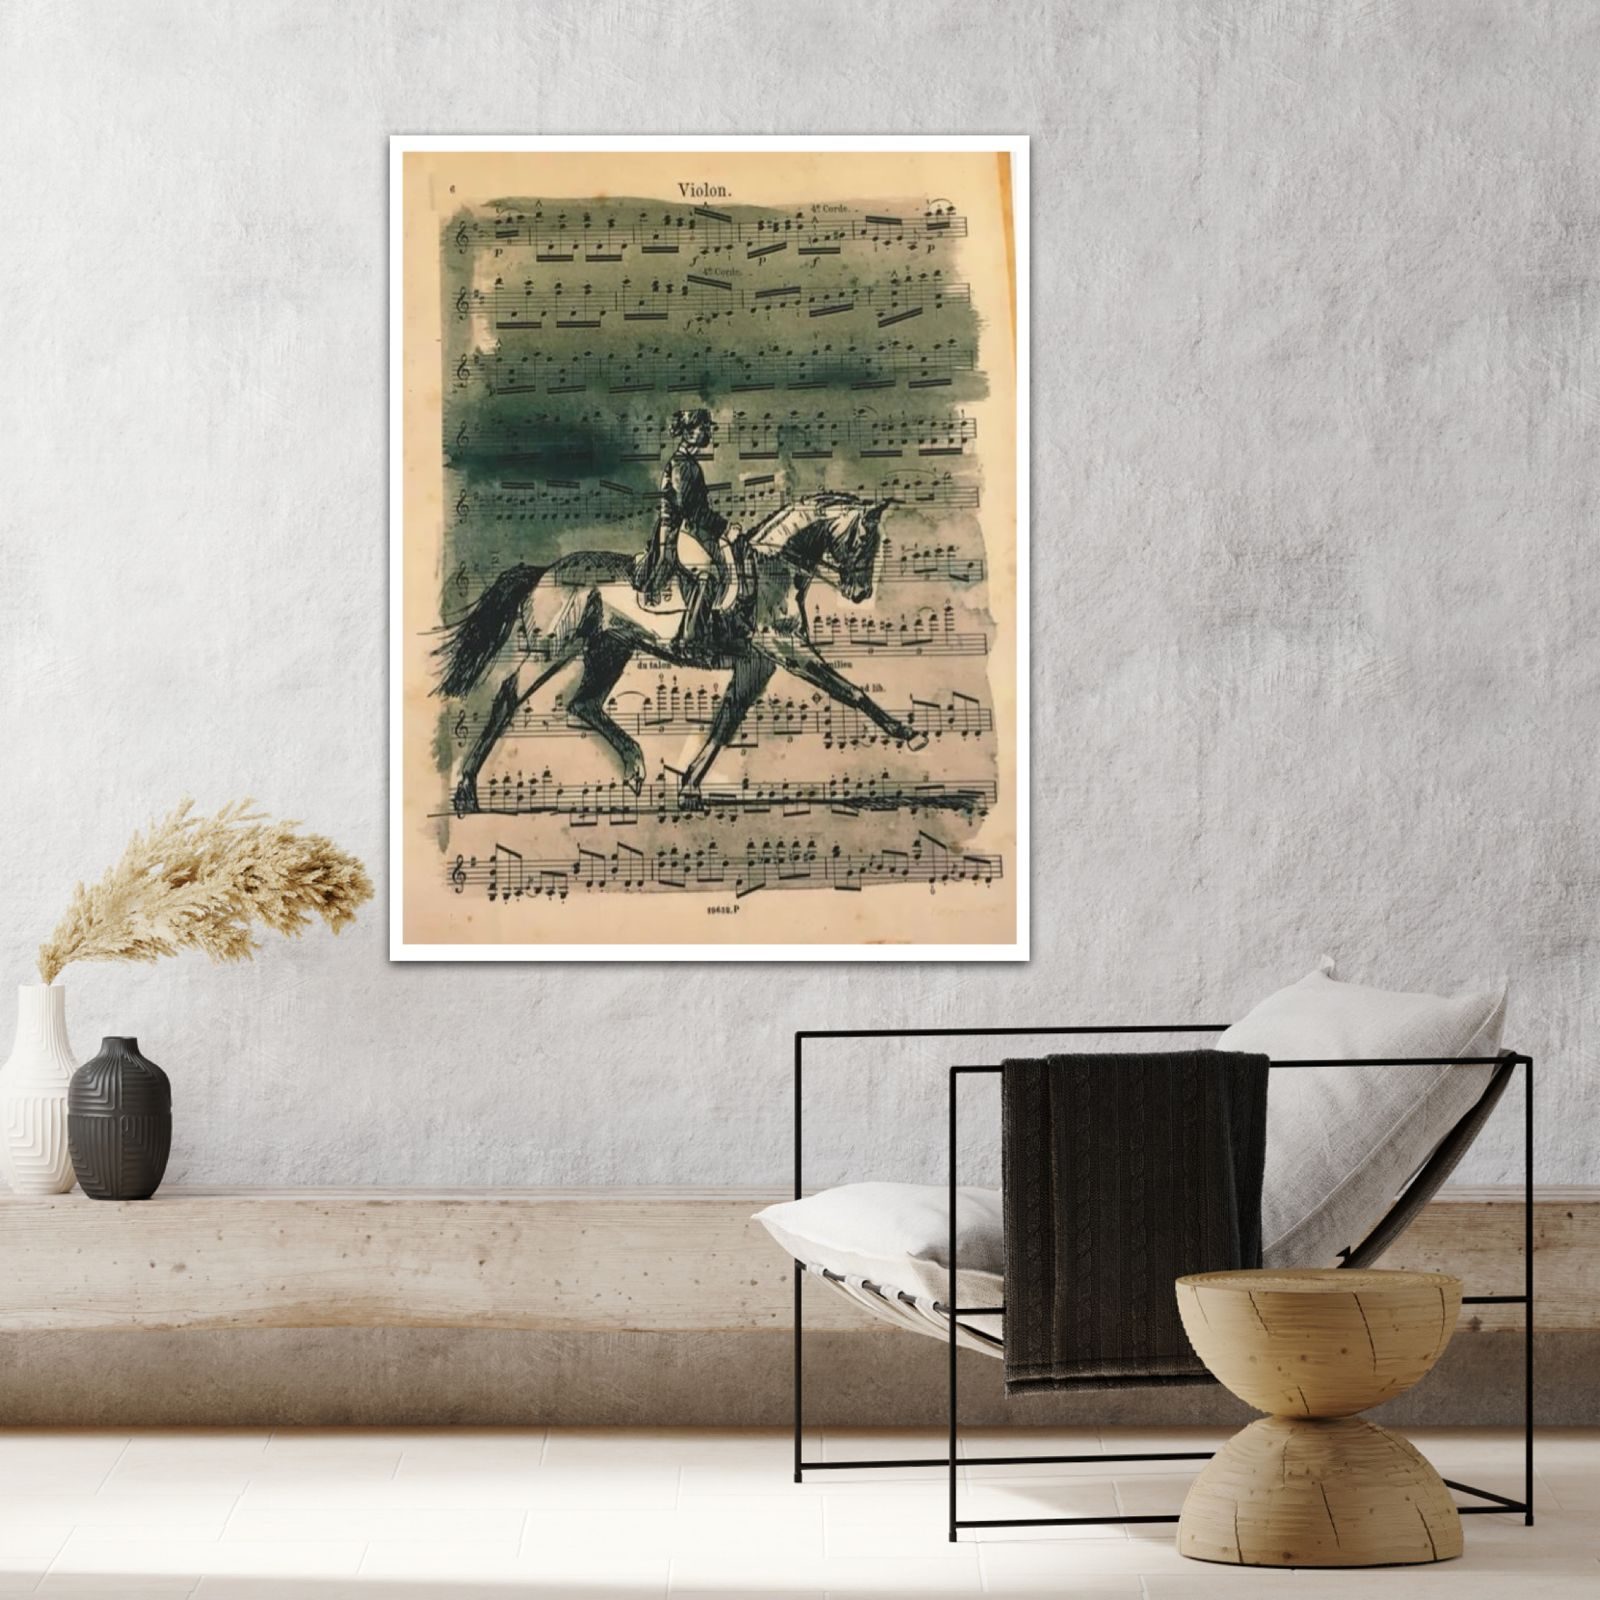 Best foot forward is a print of a dressage horse striding out done as an ink drawing on canvas or paper